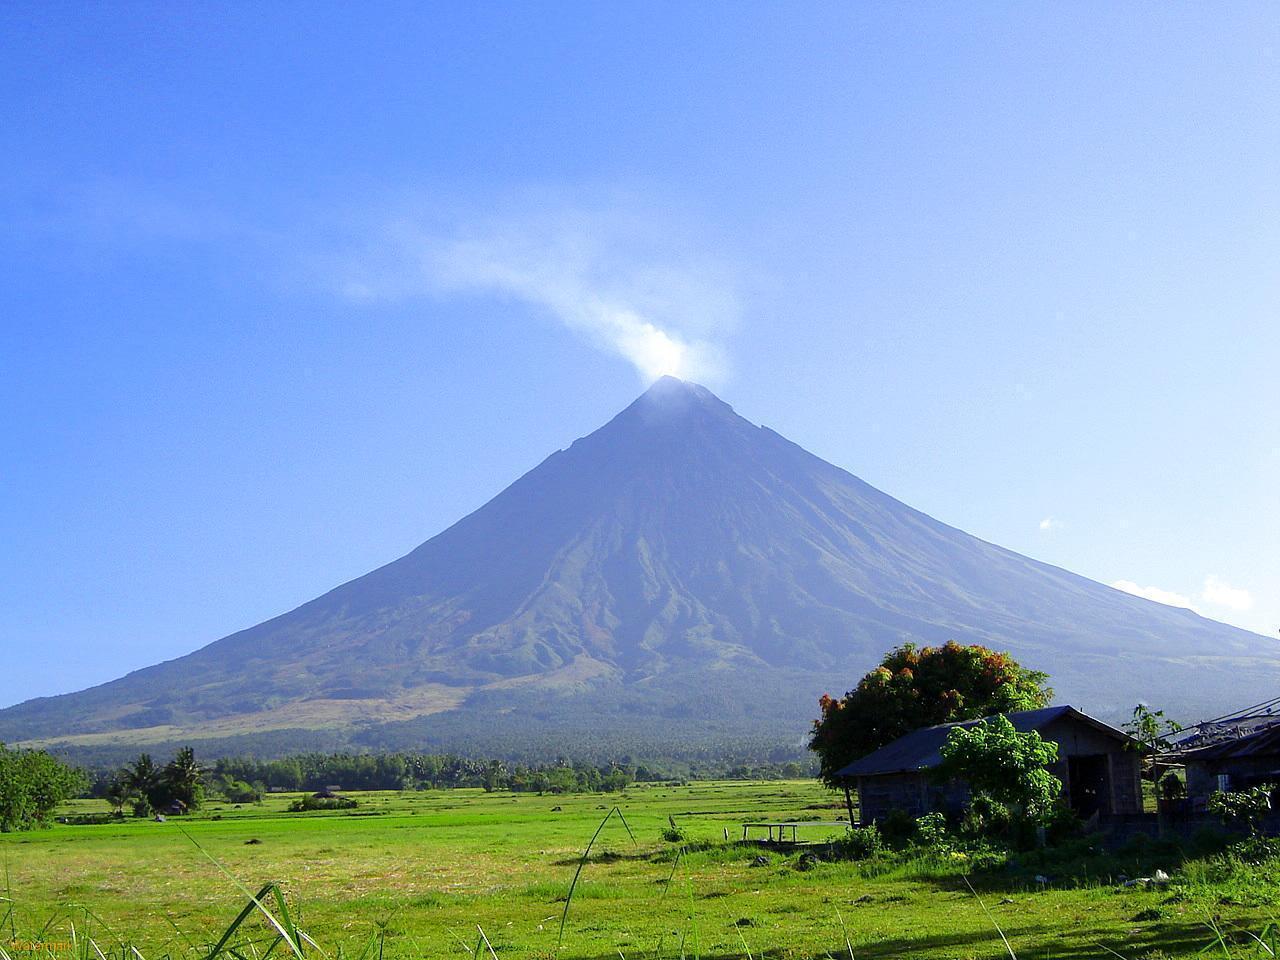 Mayon Volcano Wallpaper. Daily inspiration art photo, picture